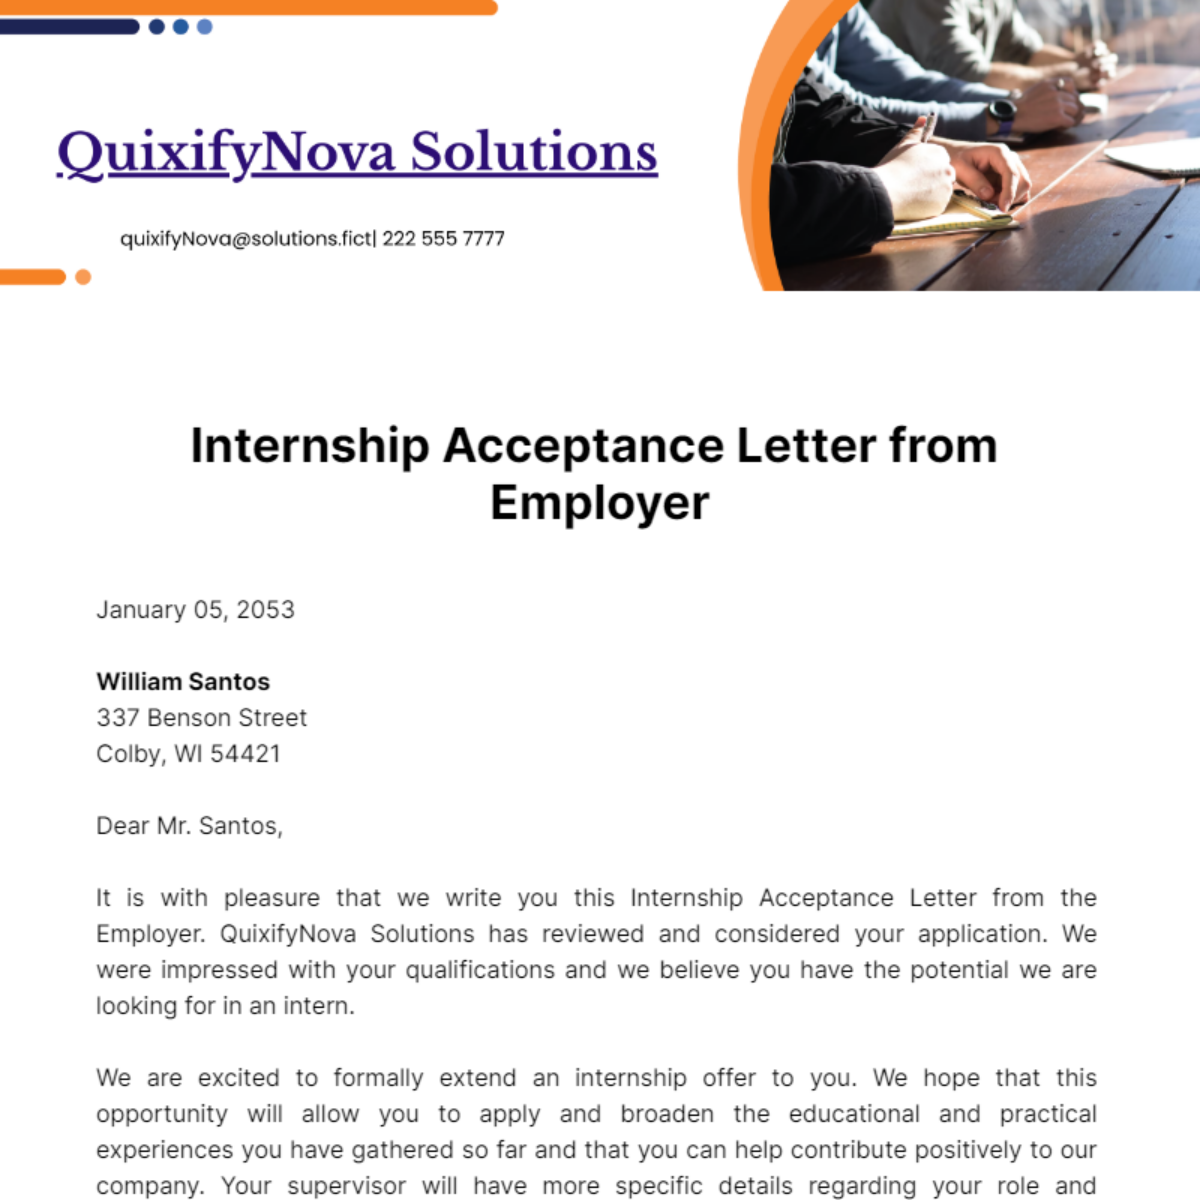 Internship Acceptance Letter from Employer Template